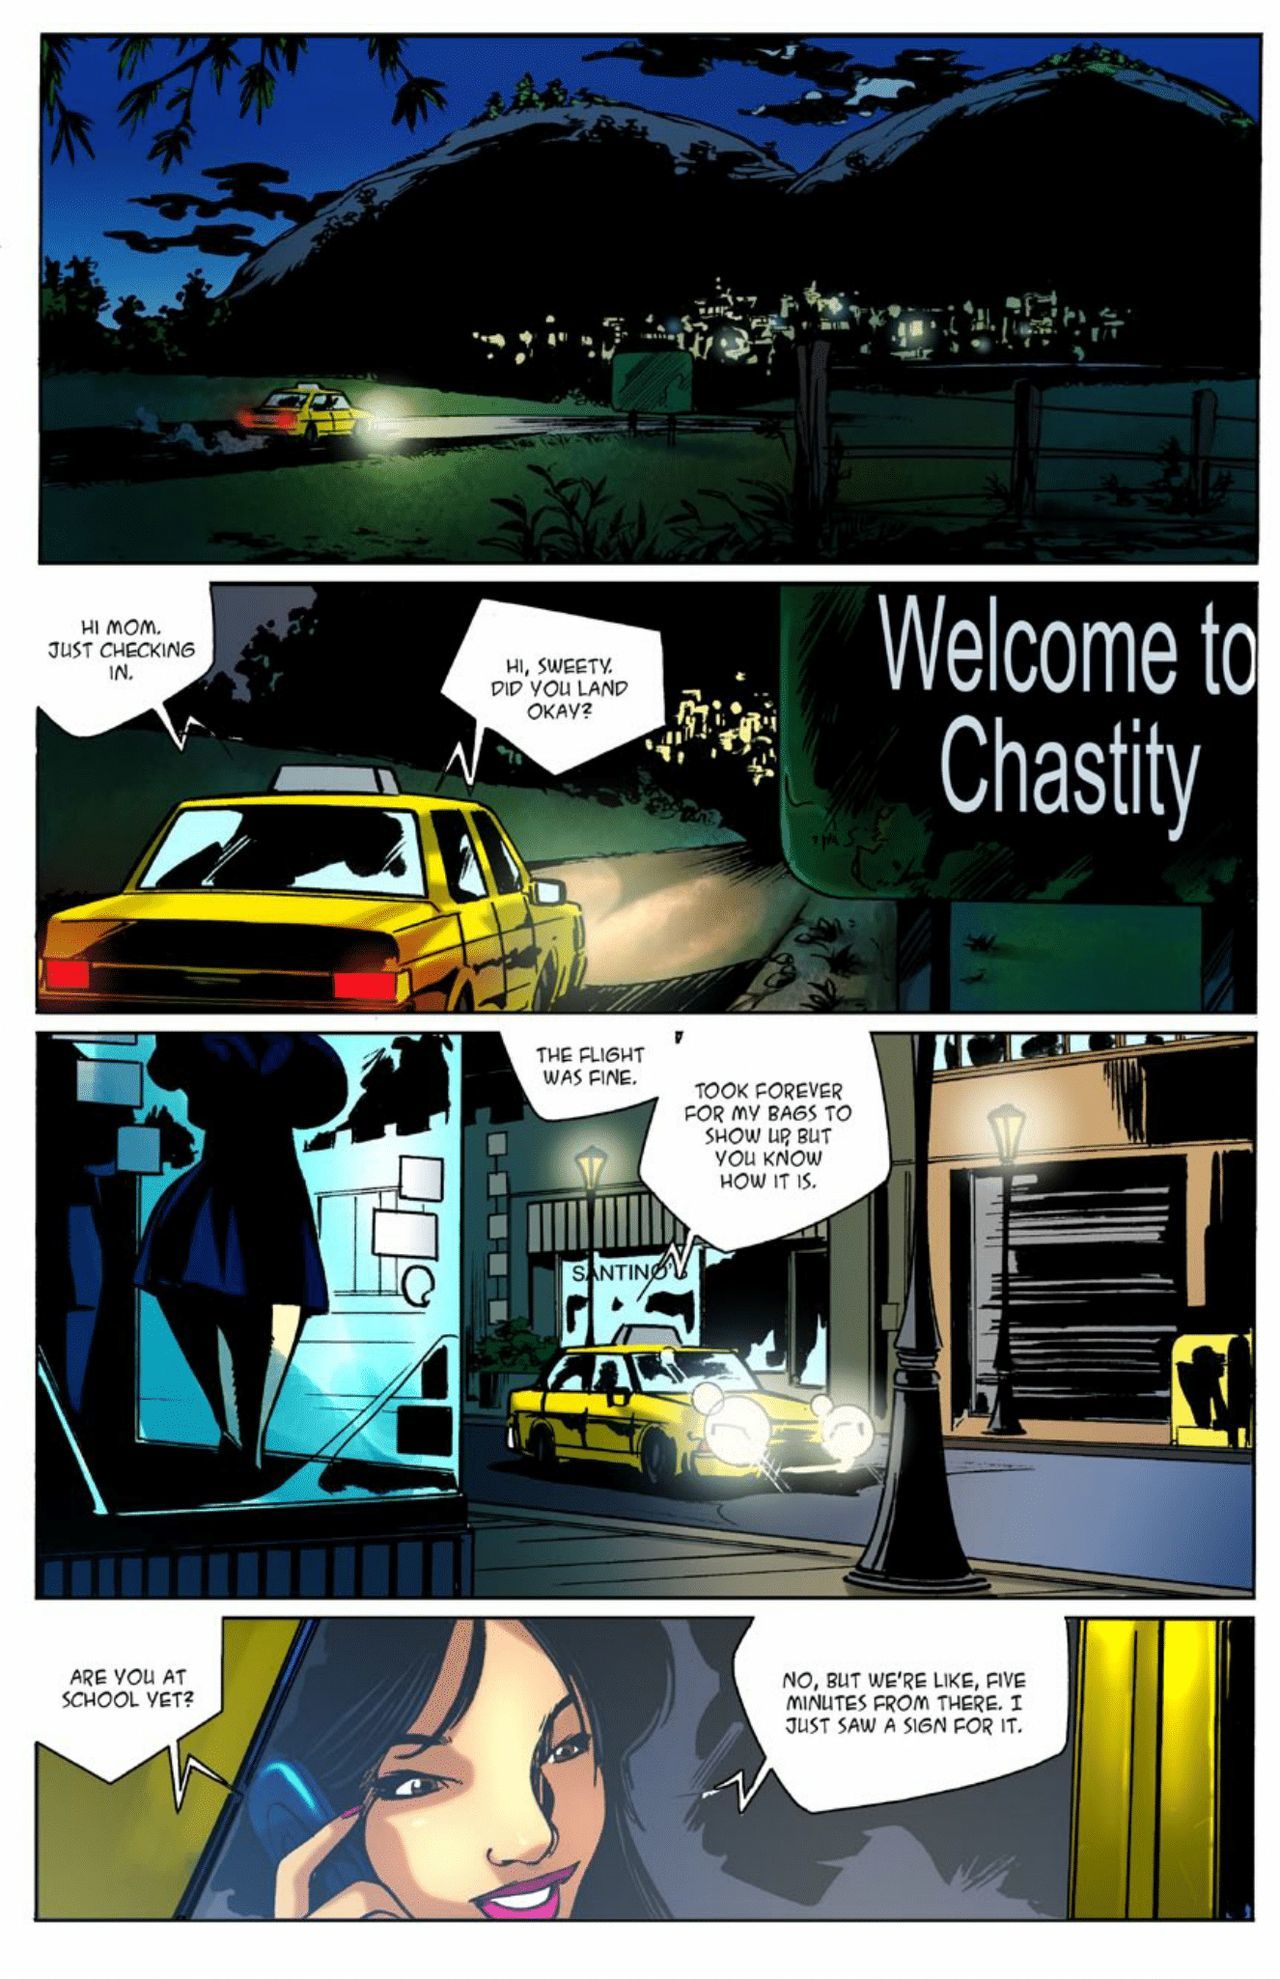 Welcome to chastity Mariano Navarro page 2